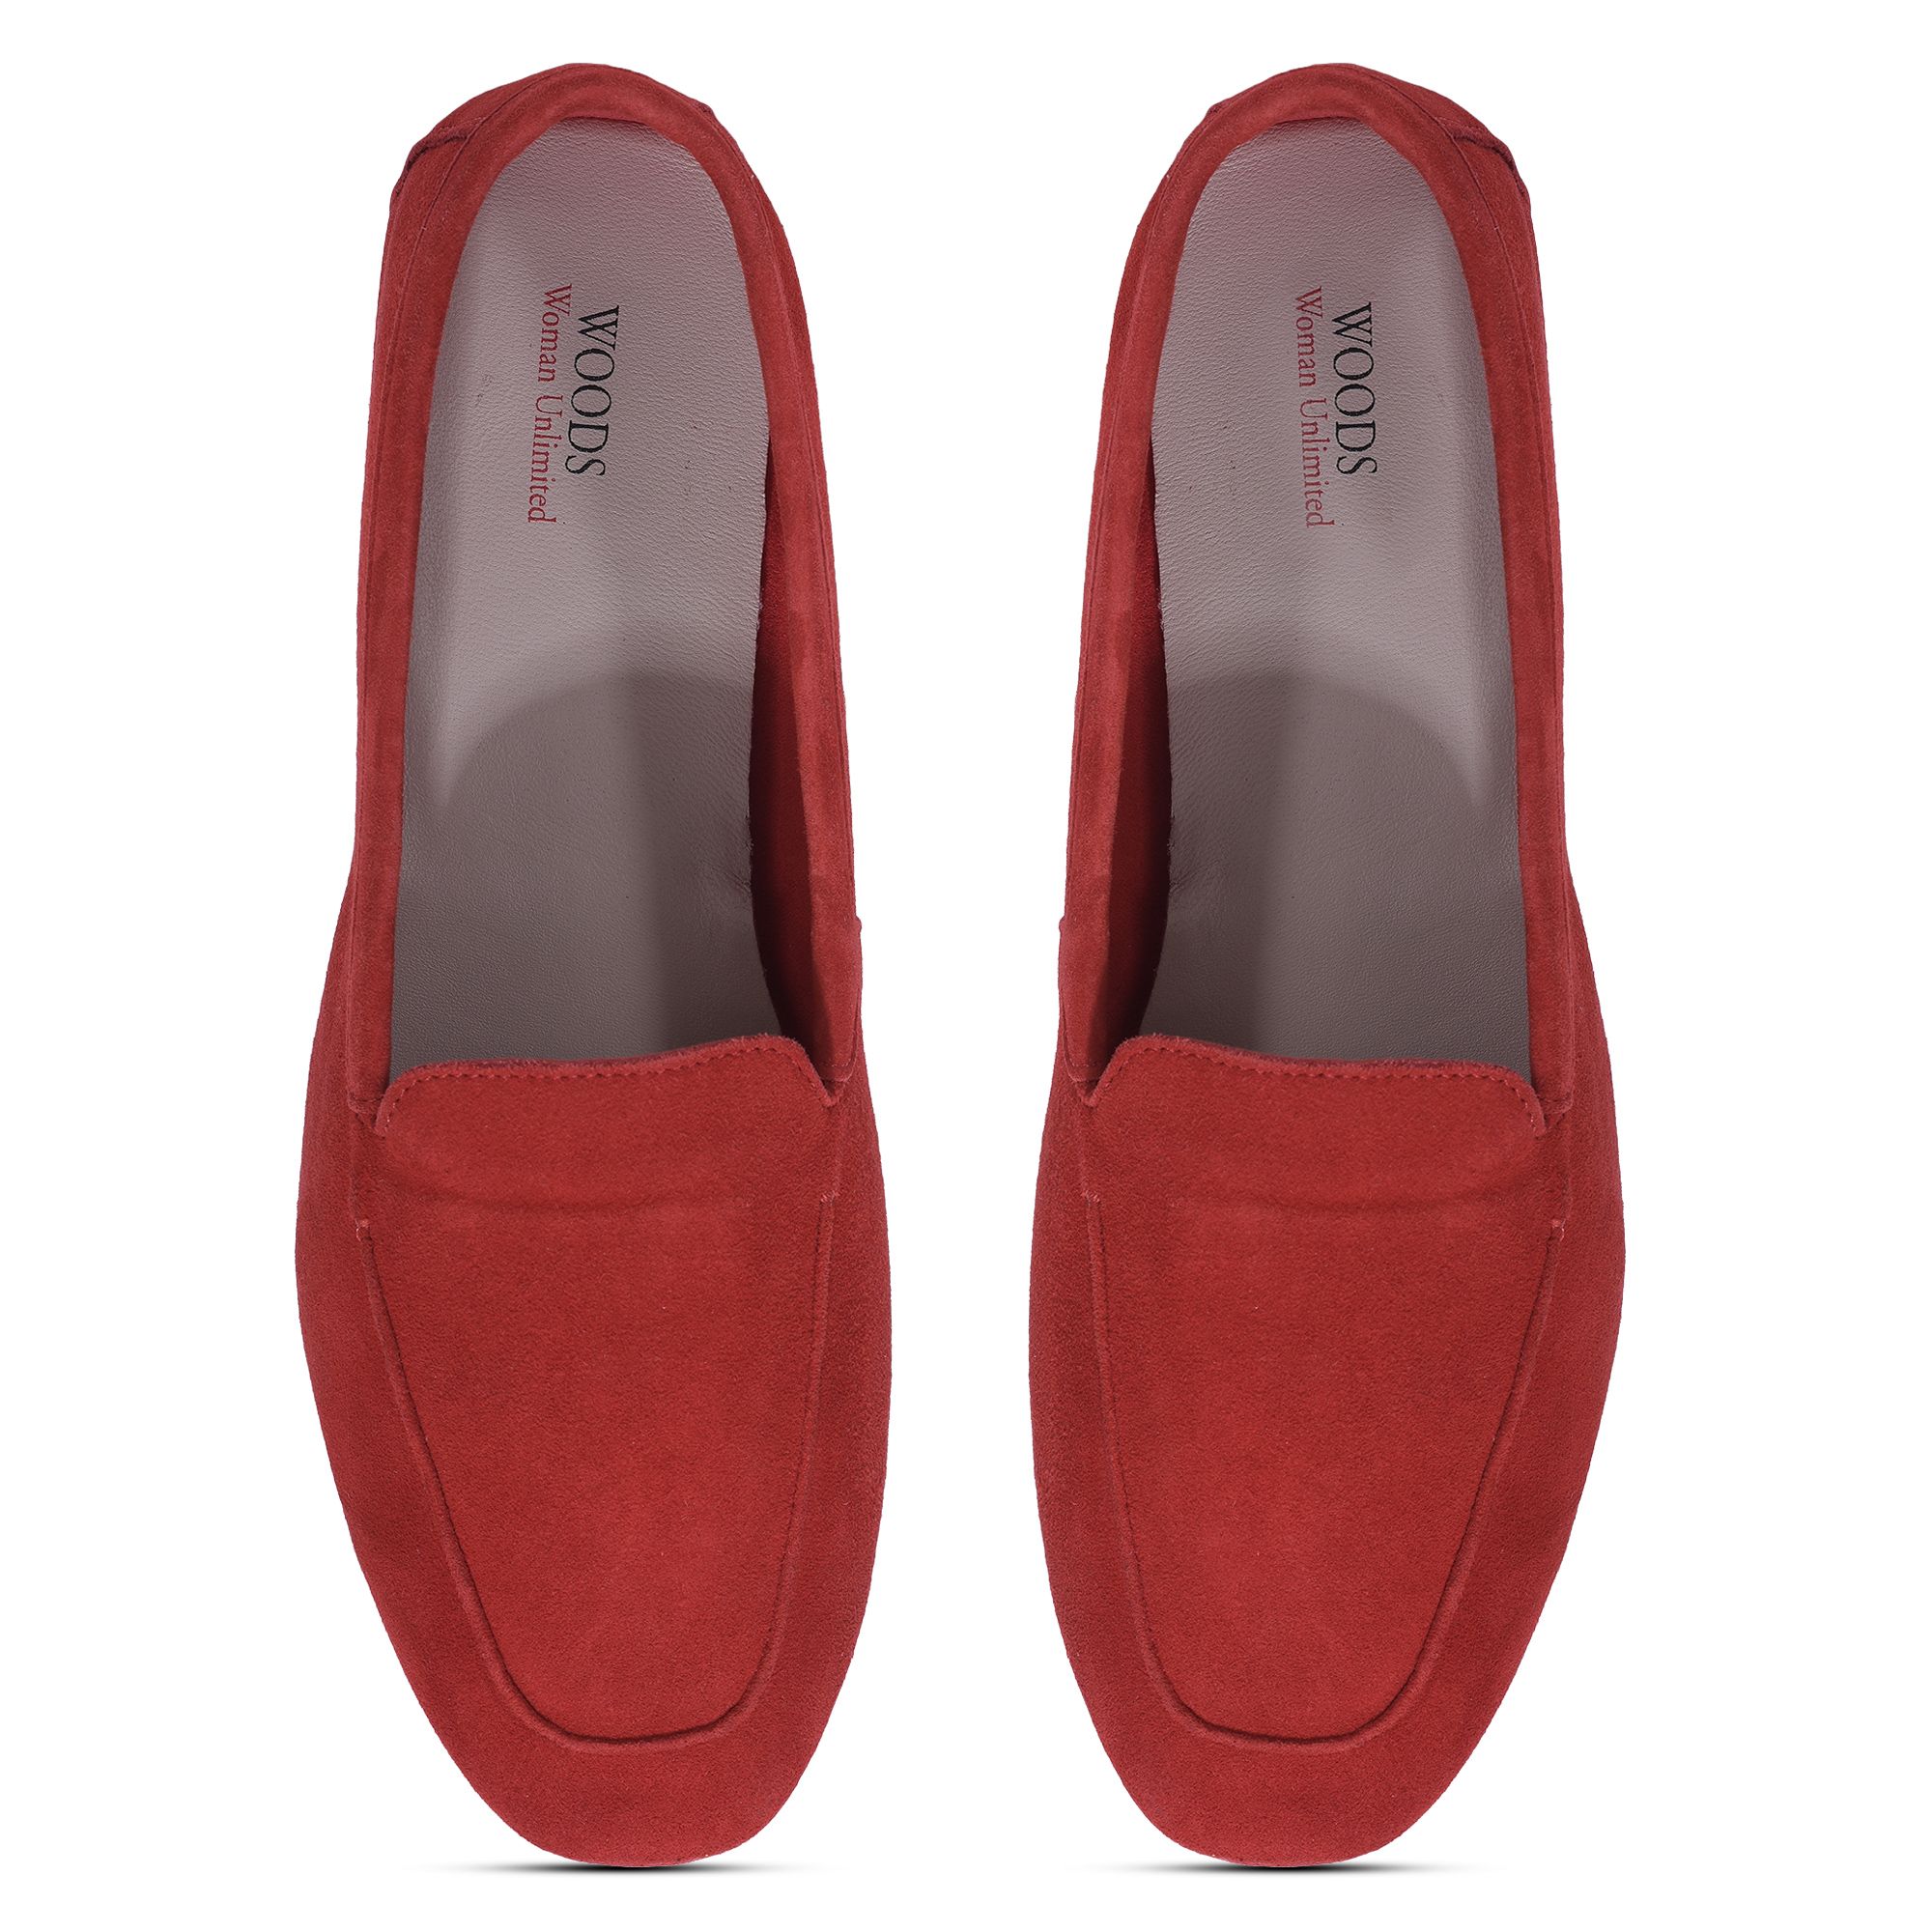 Red penny loafer for women